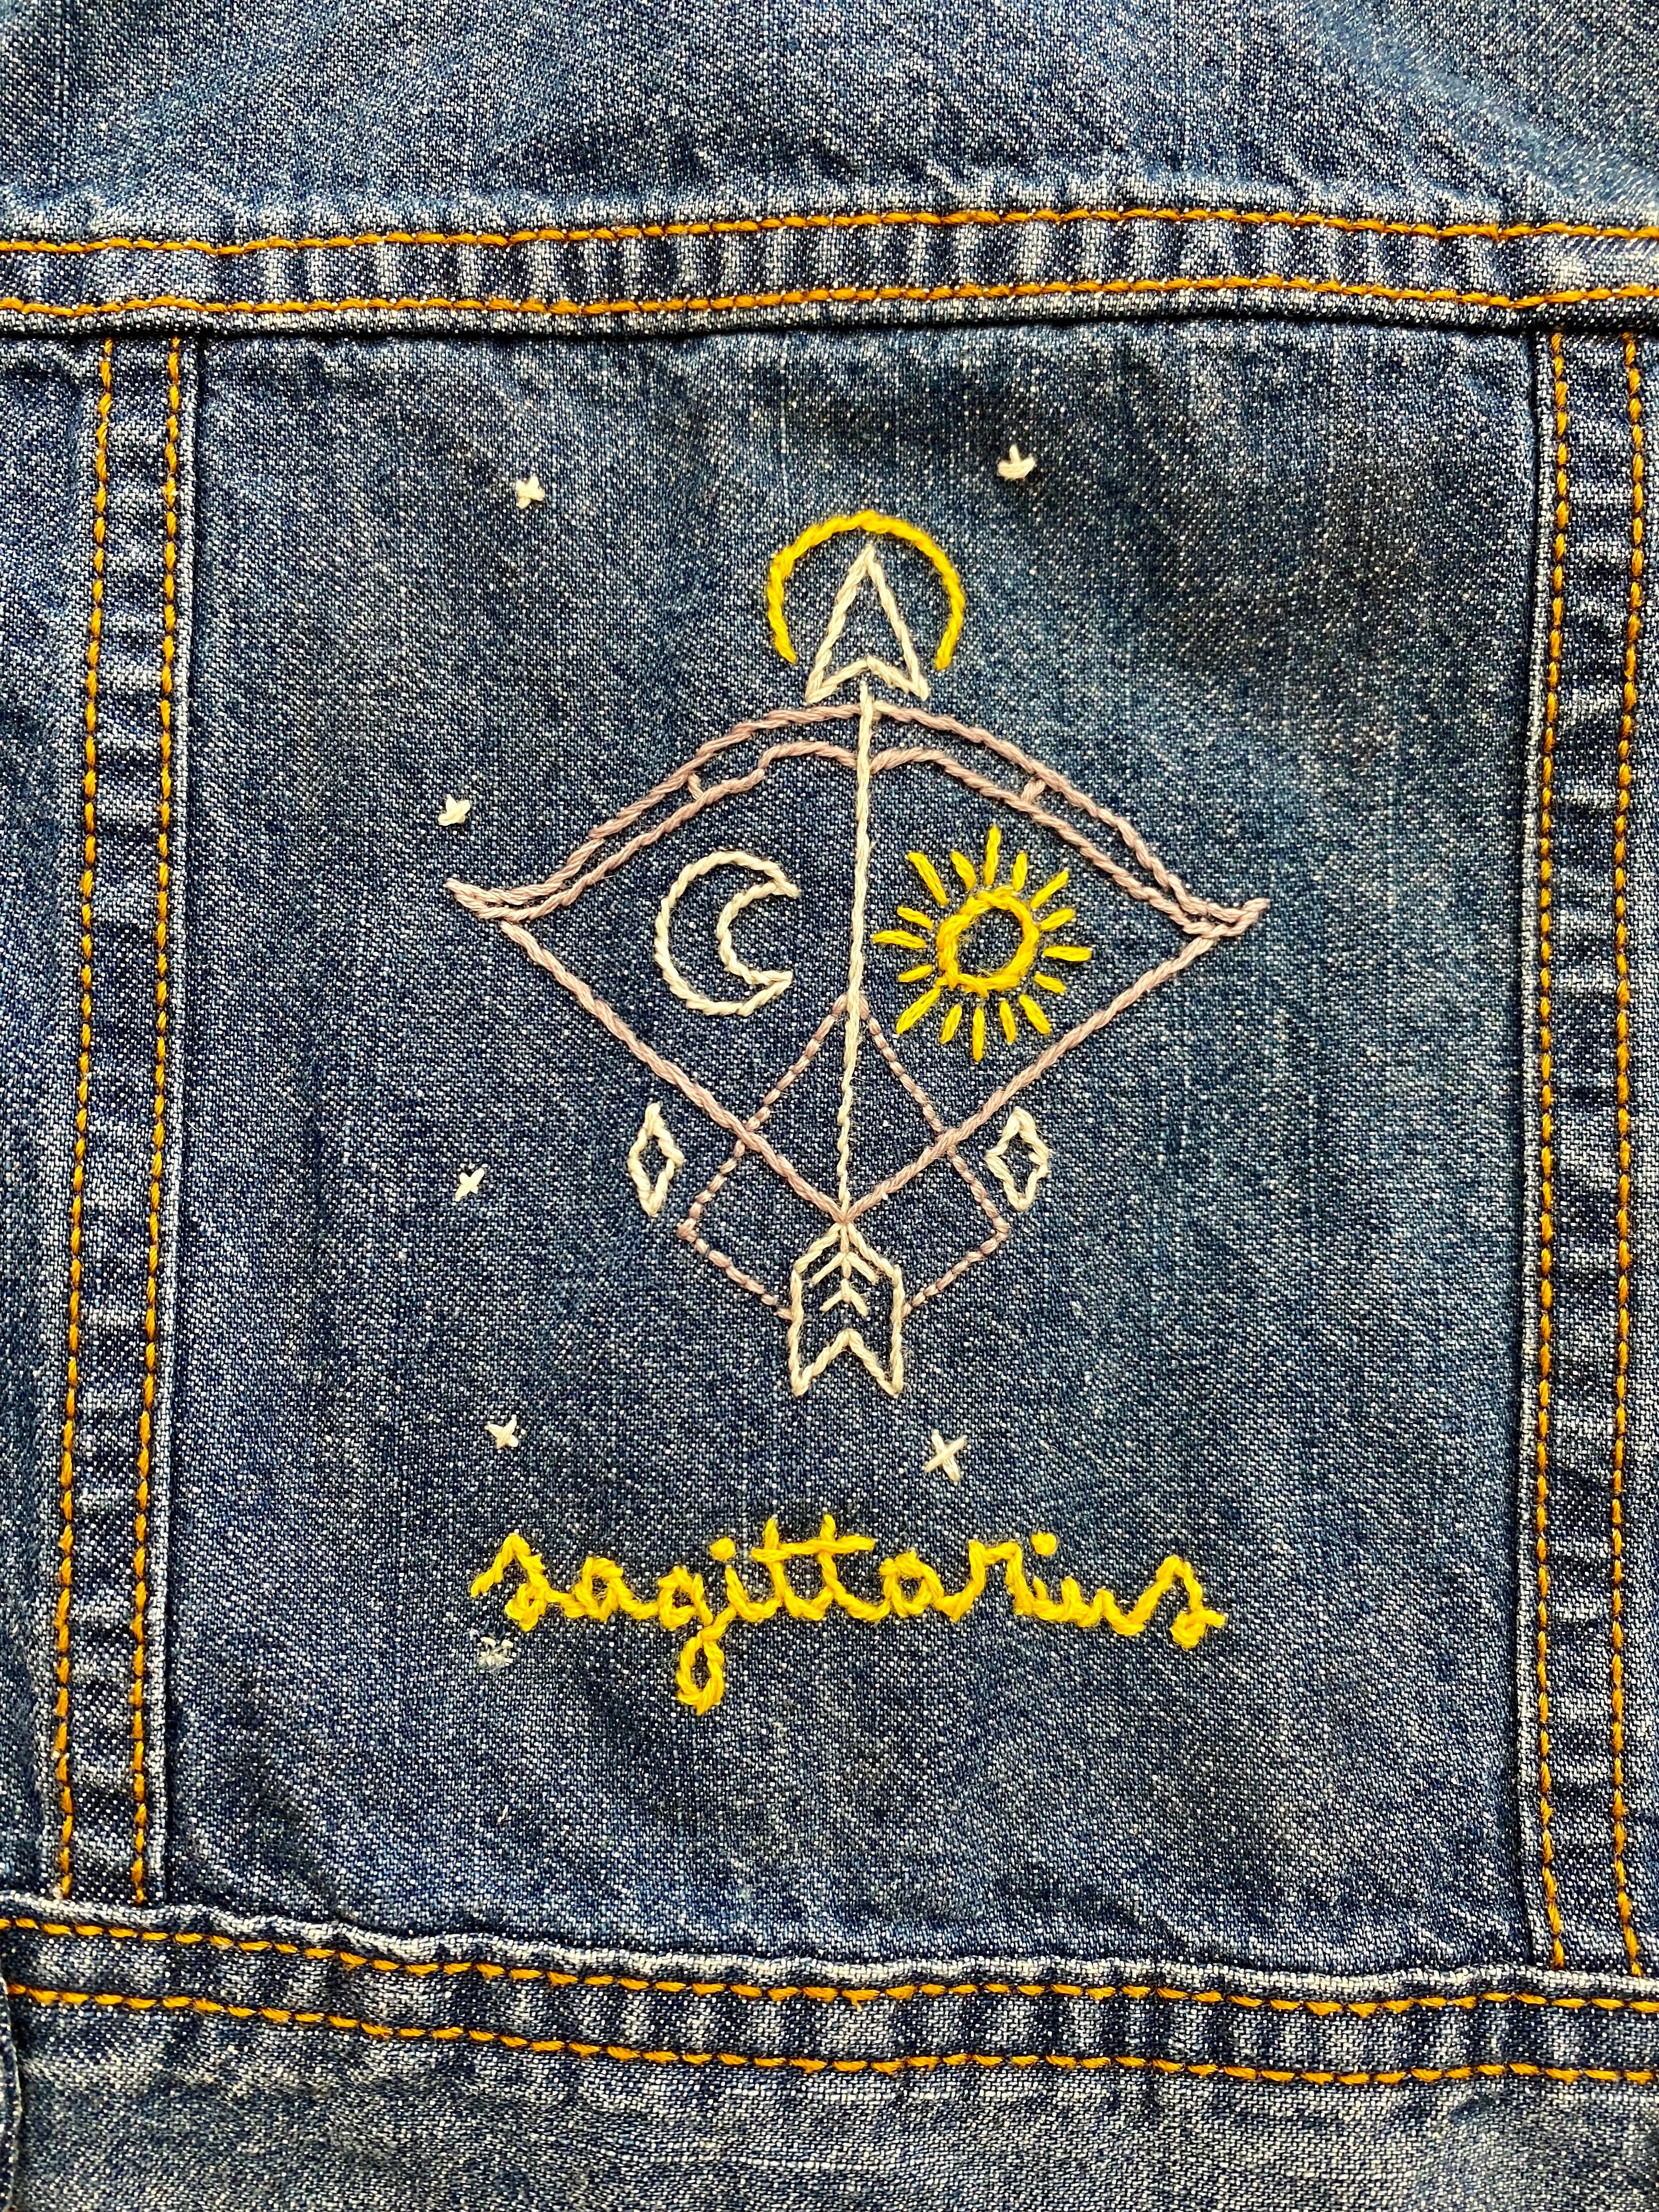 Kids Jean Jacket with Sagittarius Embroidery by Maggie Morris